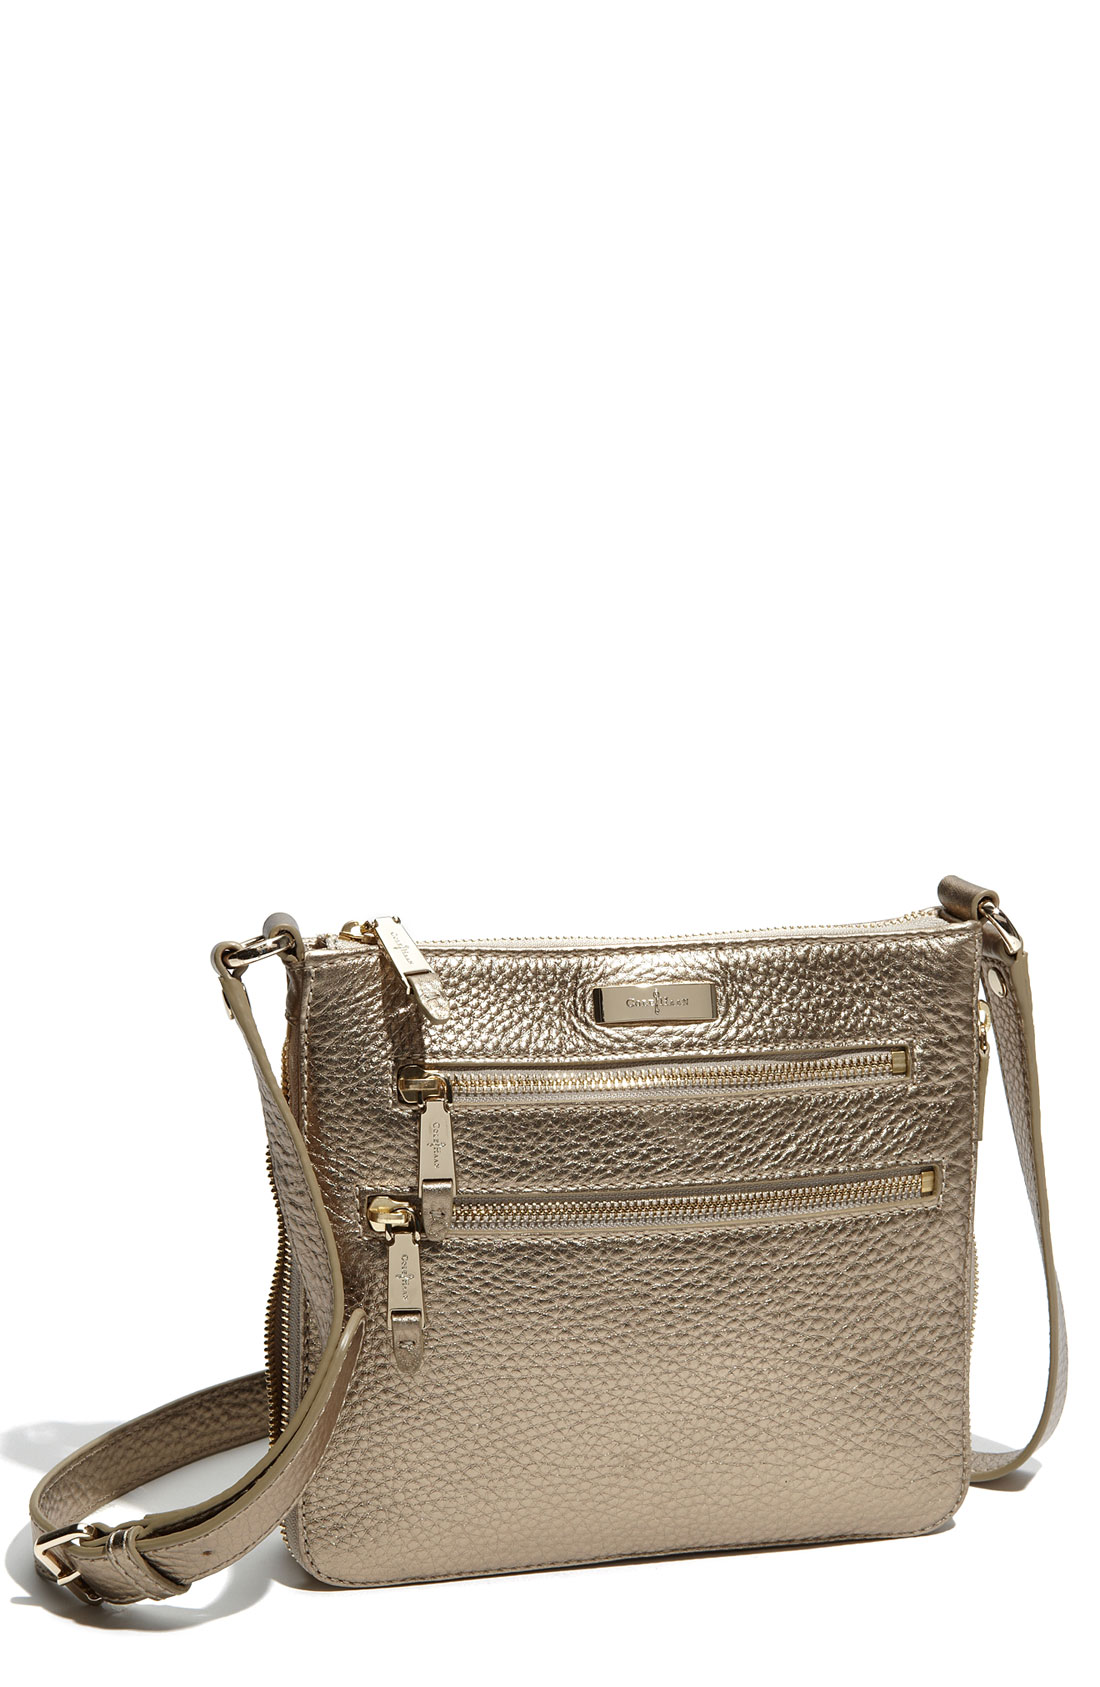 Cole Haan Village Sheila Leather Crossbody Bag in Gold (soft gold metallic) | Lyst